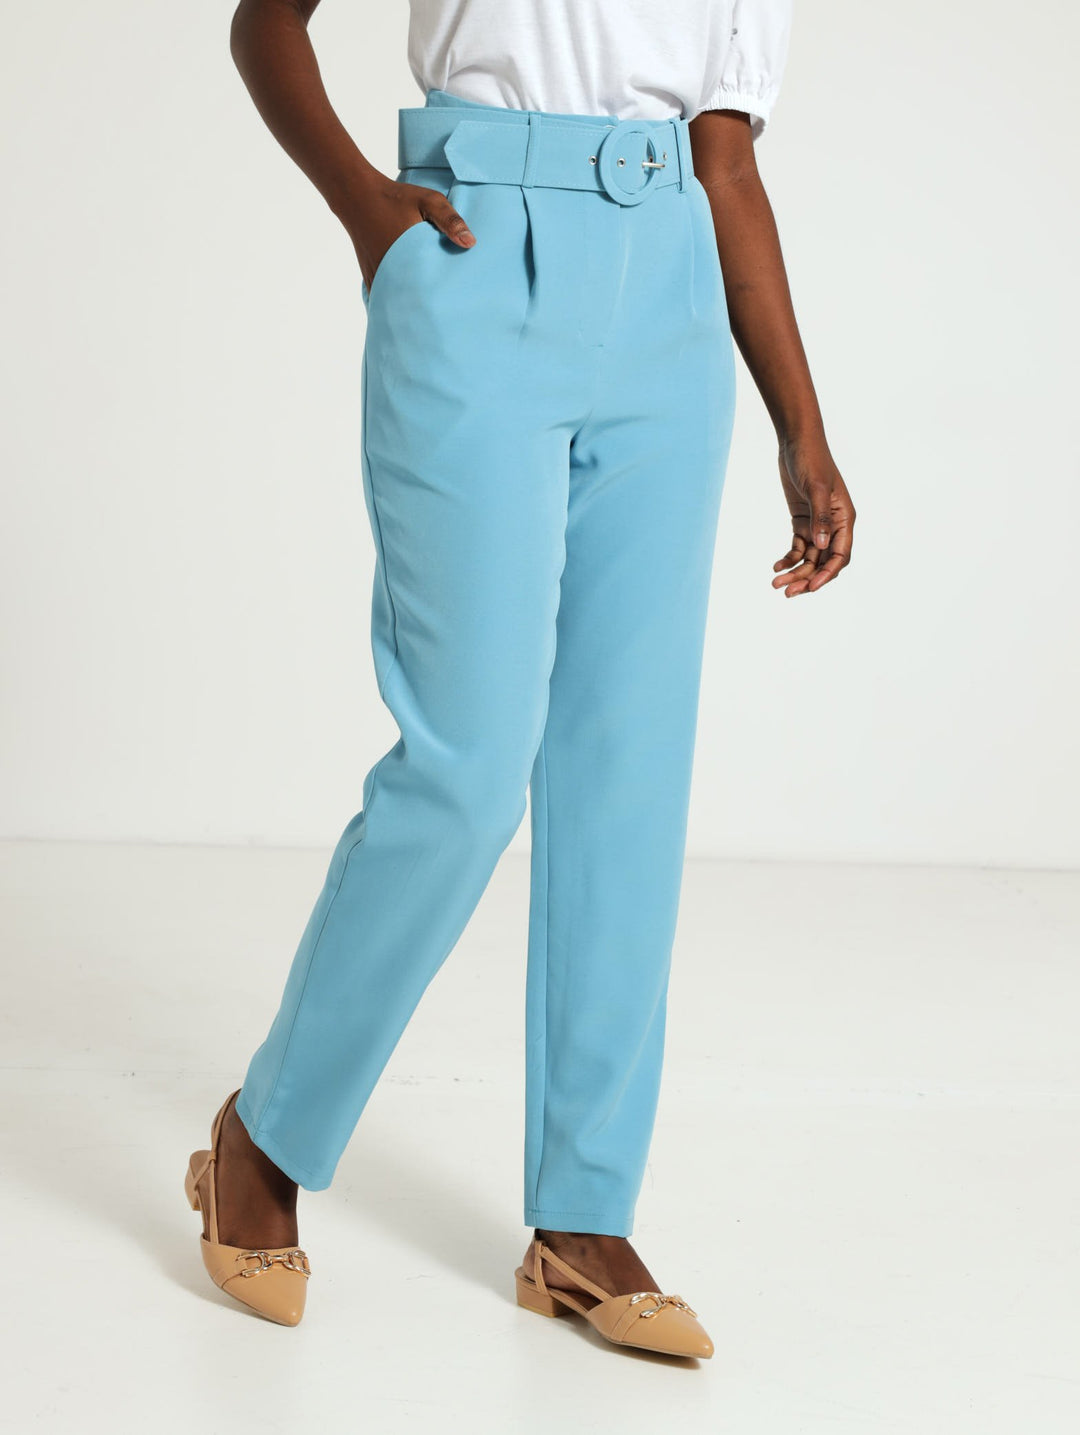 Round Buckle Tapared Pants - Light Blue